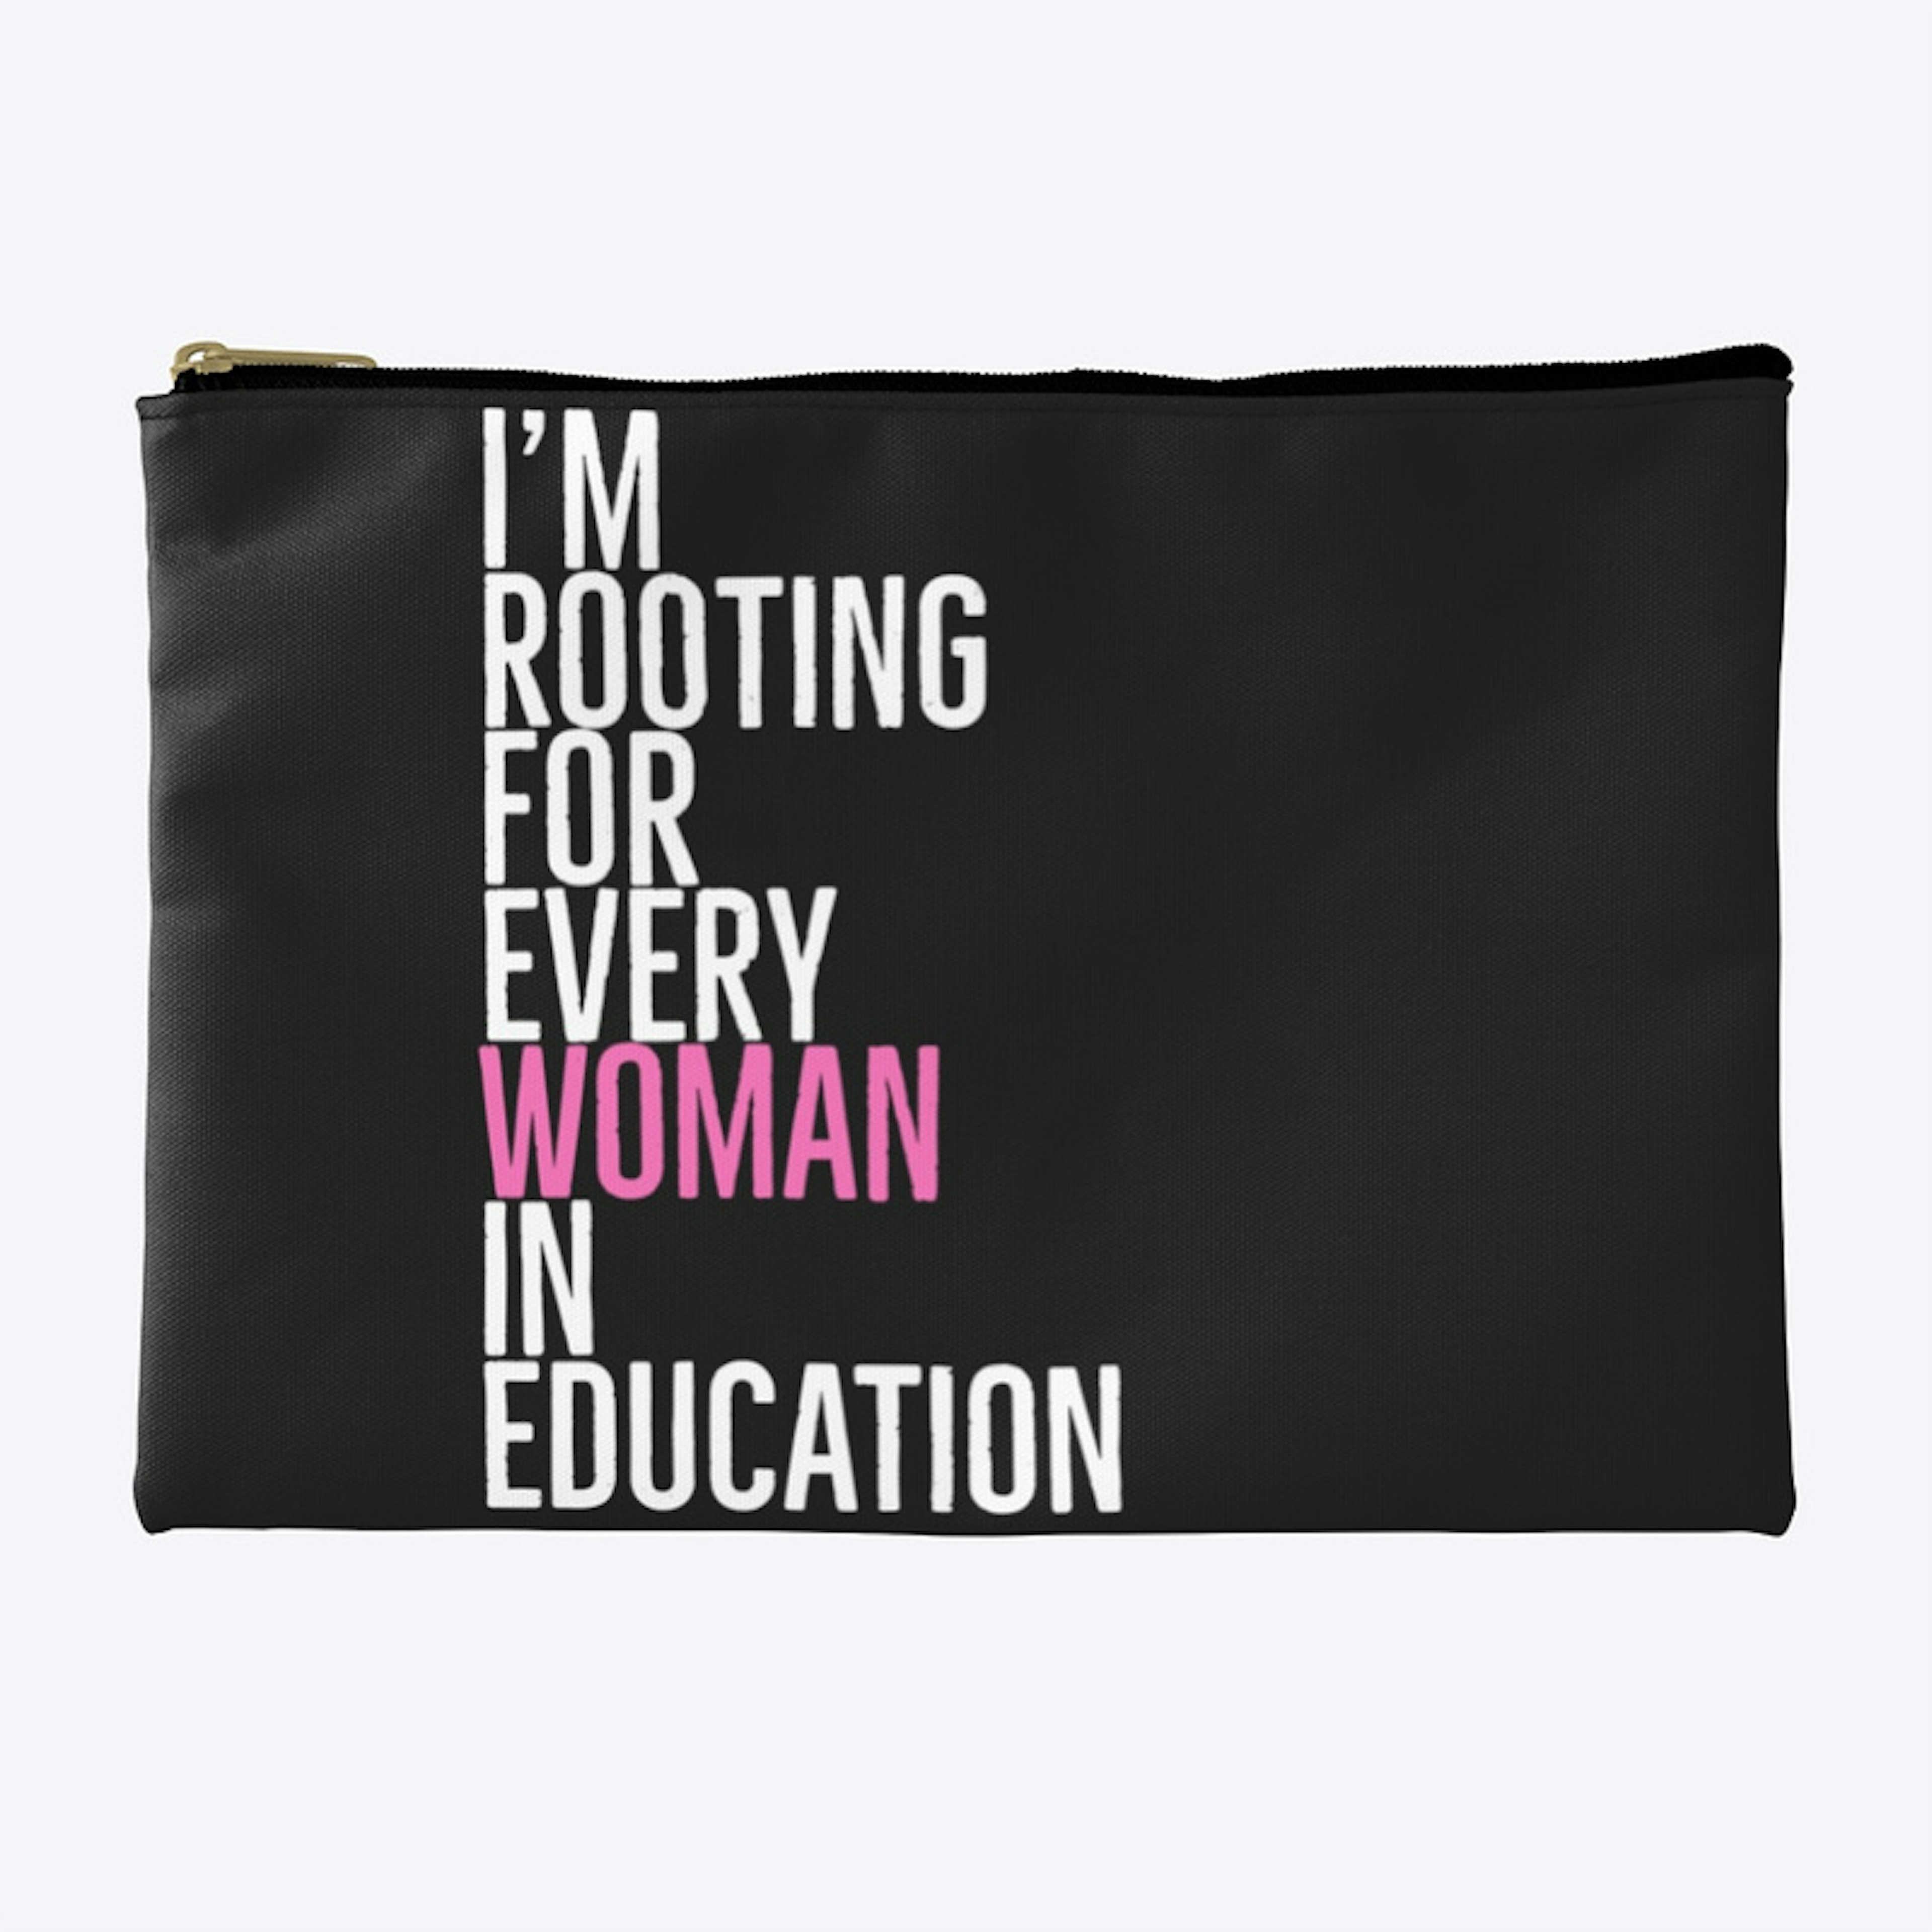 Rooting for every woman 